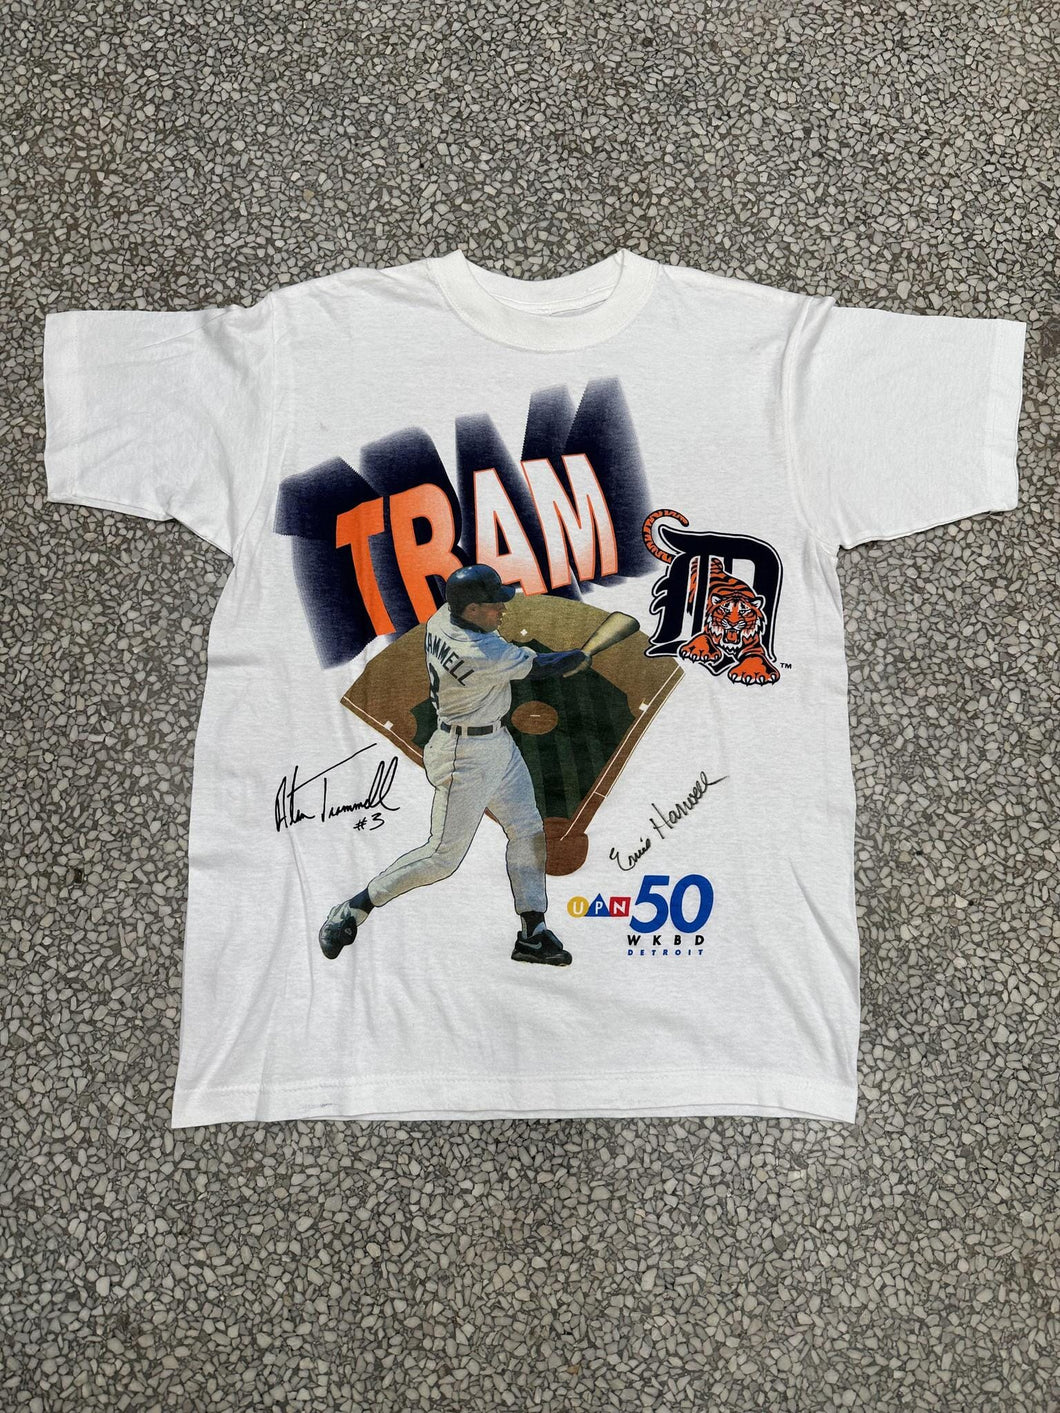 Detroit Tigers Alan Trammell Vintage 90s TRAM Tee With Ernie Harwell Autograph ABC Vintage 